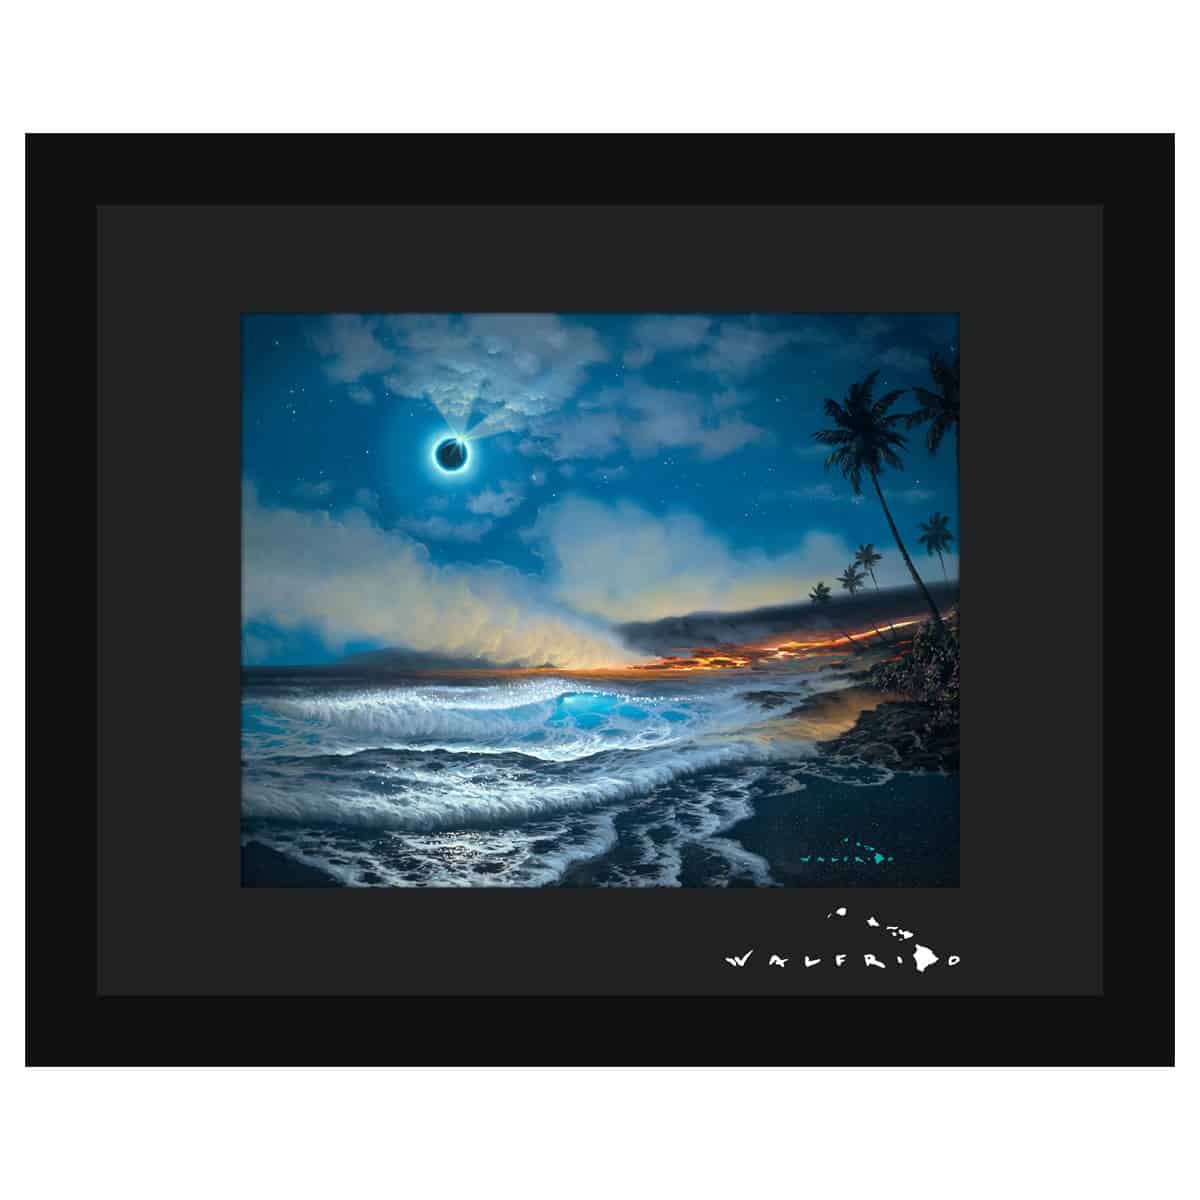 walfrido mysteries of the night matted black frame